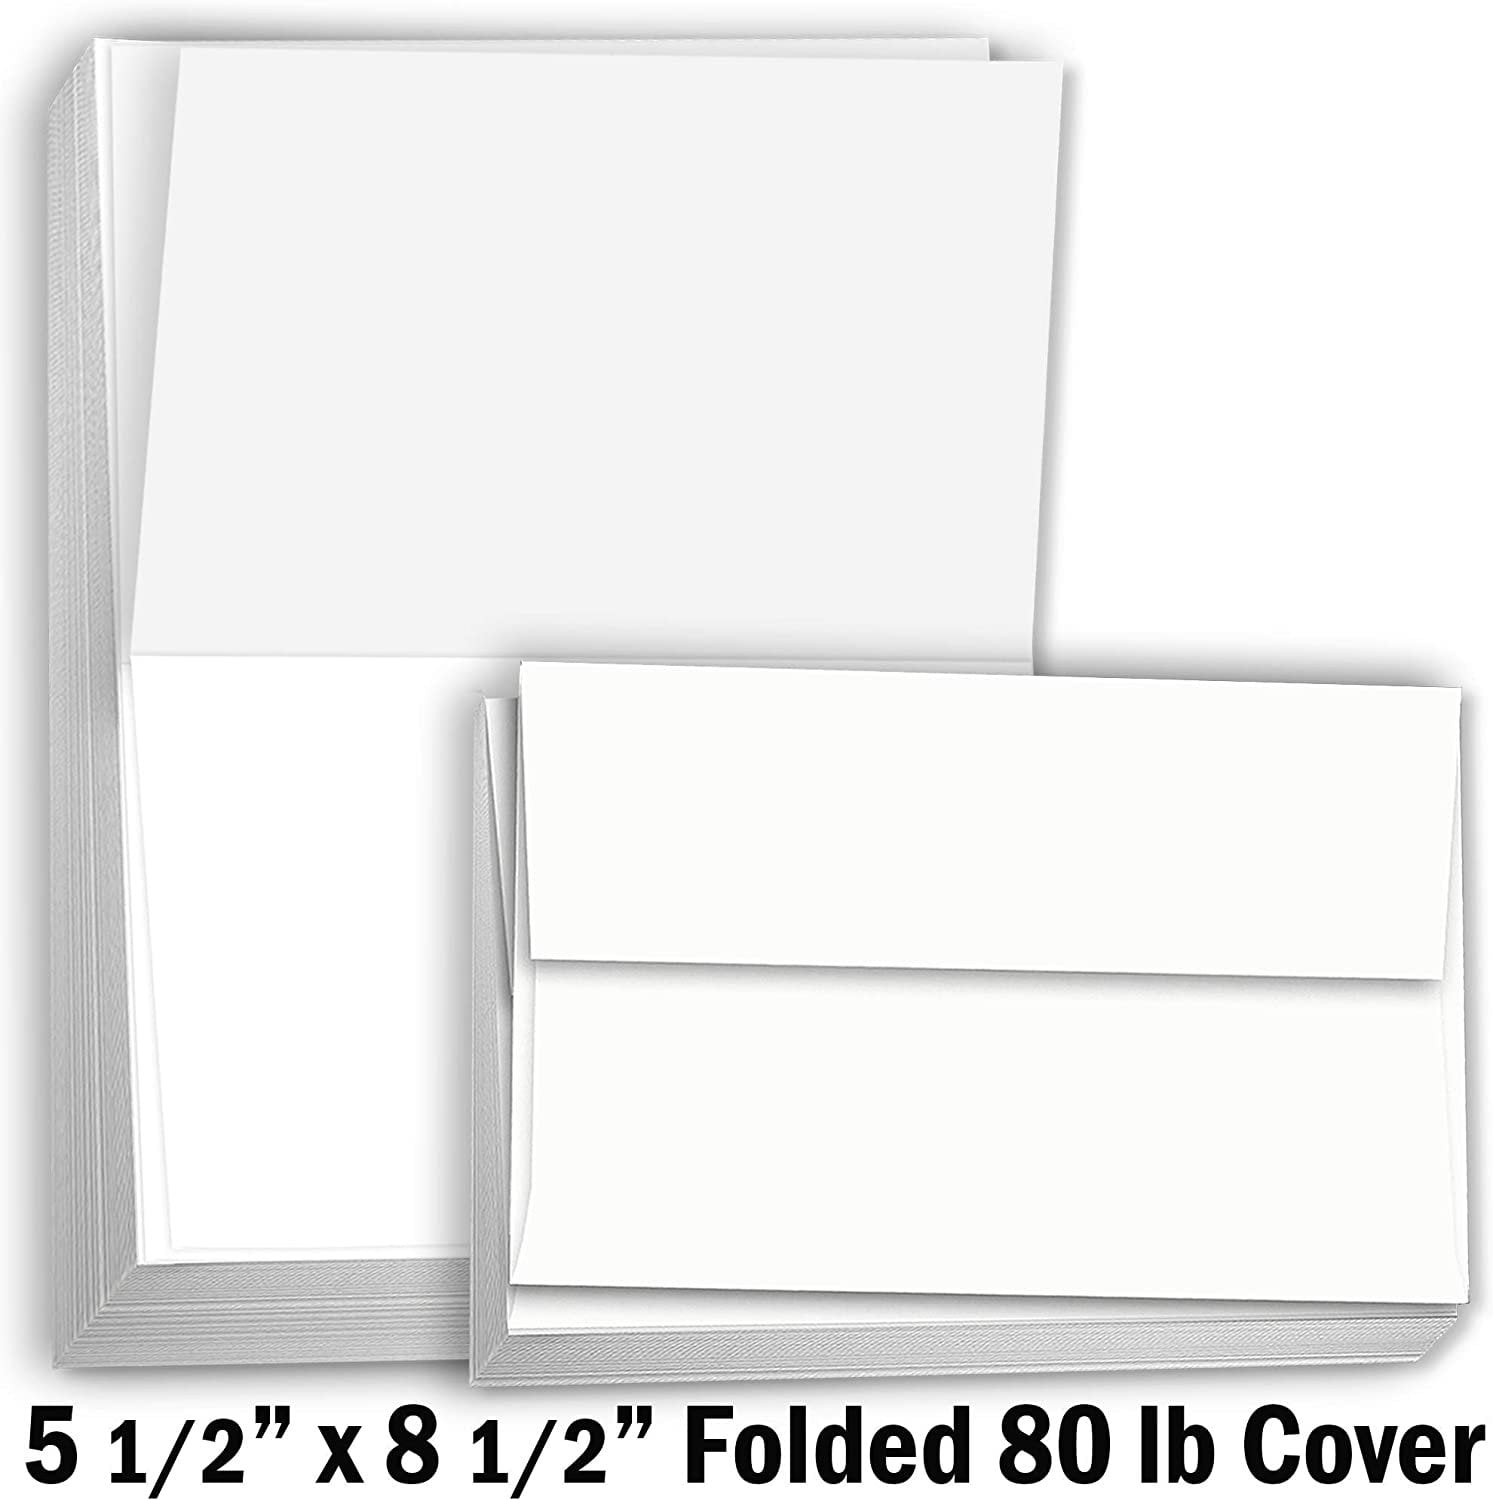 Classic Linen 80lb Cover 25 Per Pack 5 x 7" Foldover Greeting Cards 